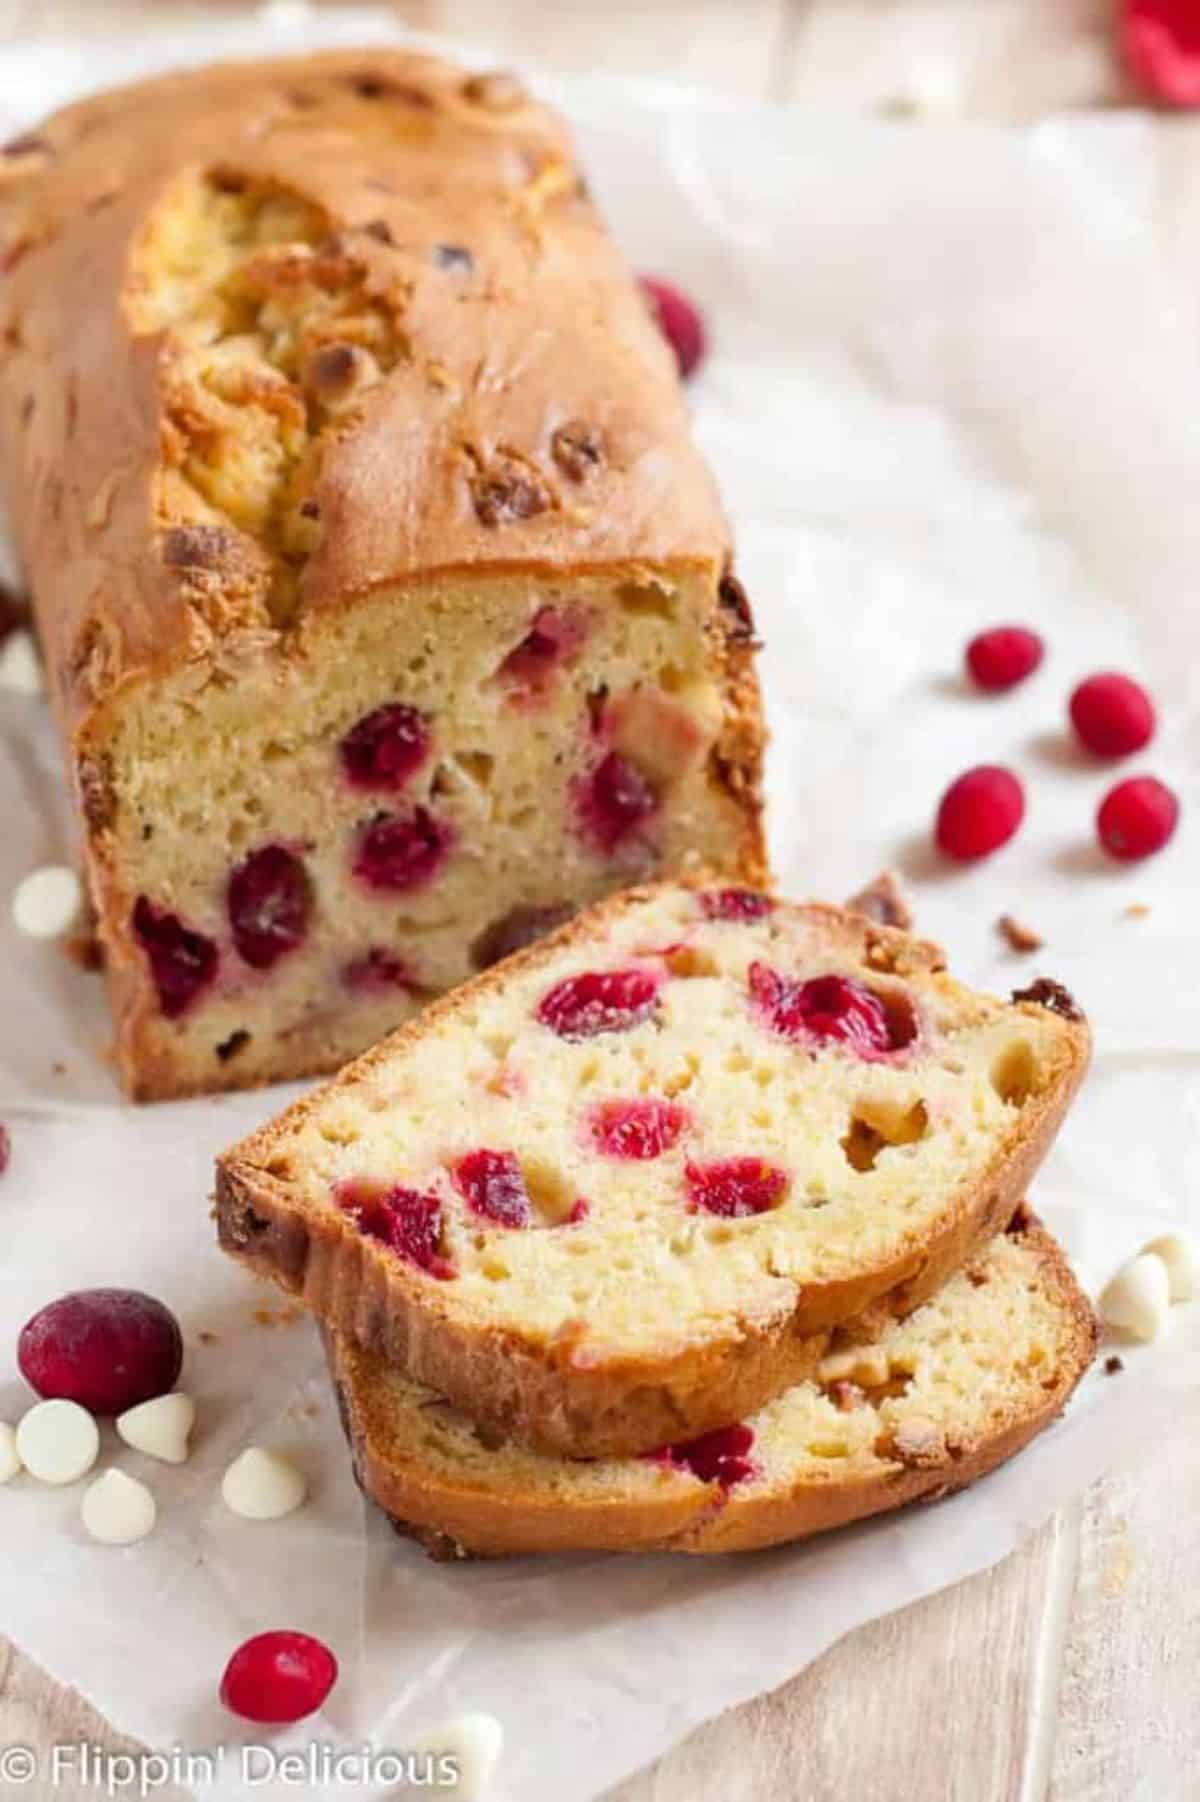 Partially sliced Gluten-Free Cranberry Bread with Orange on a table.